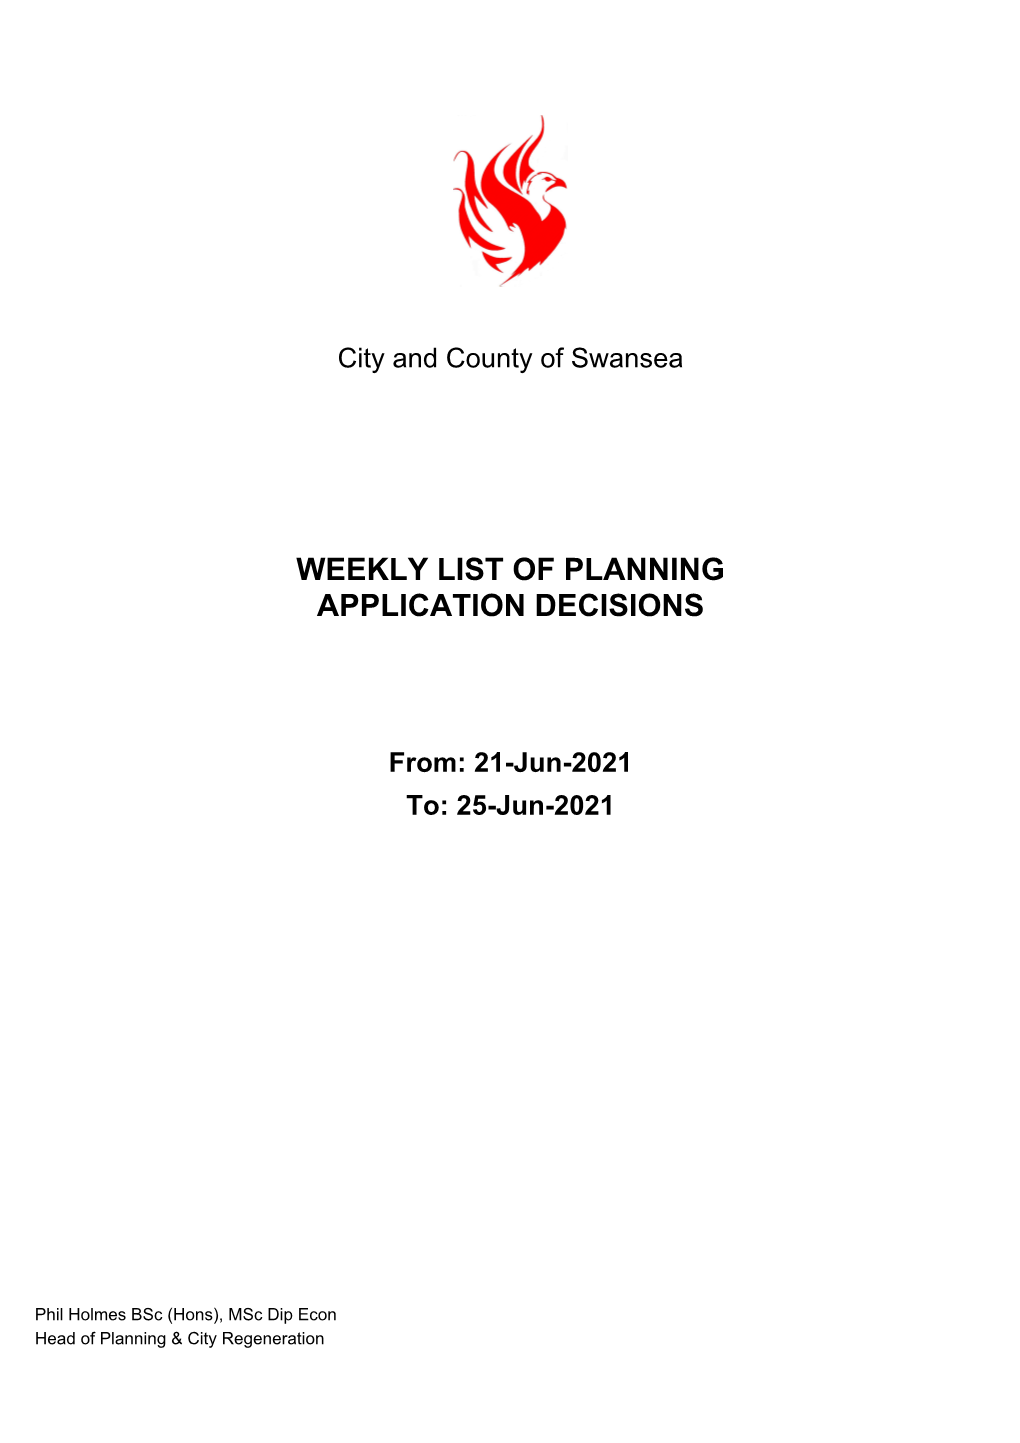 Weekly List of Planning Application Decisions